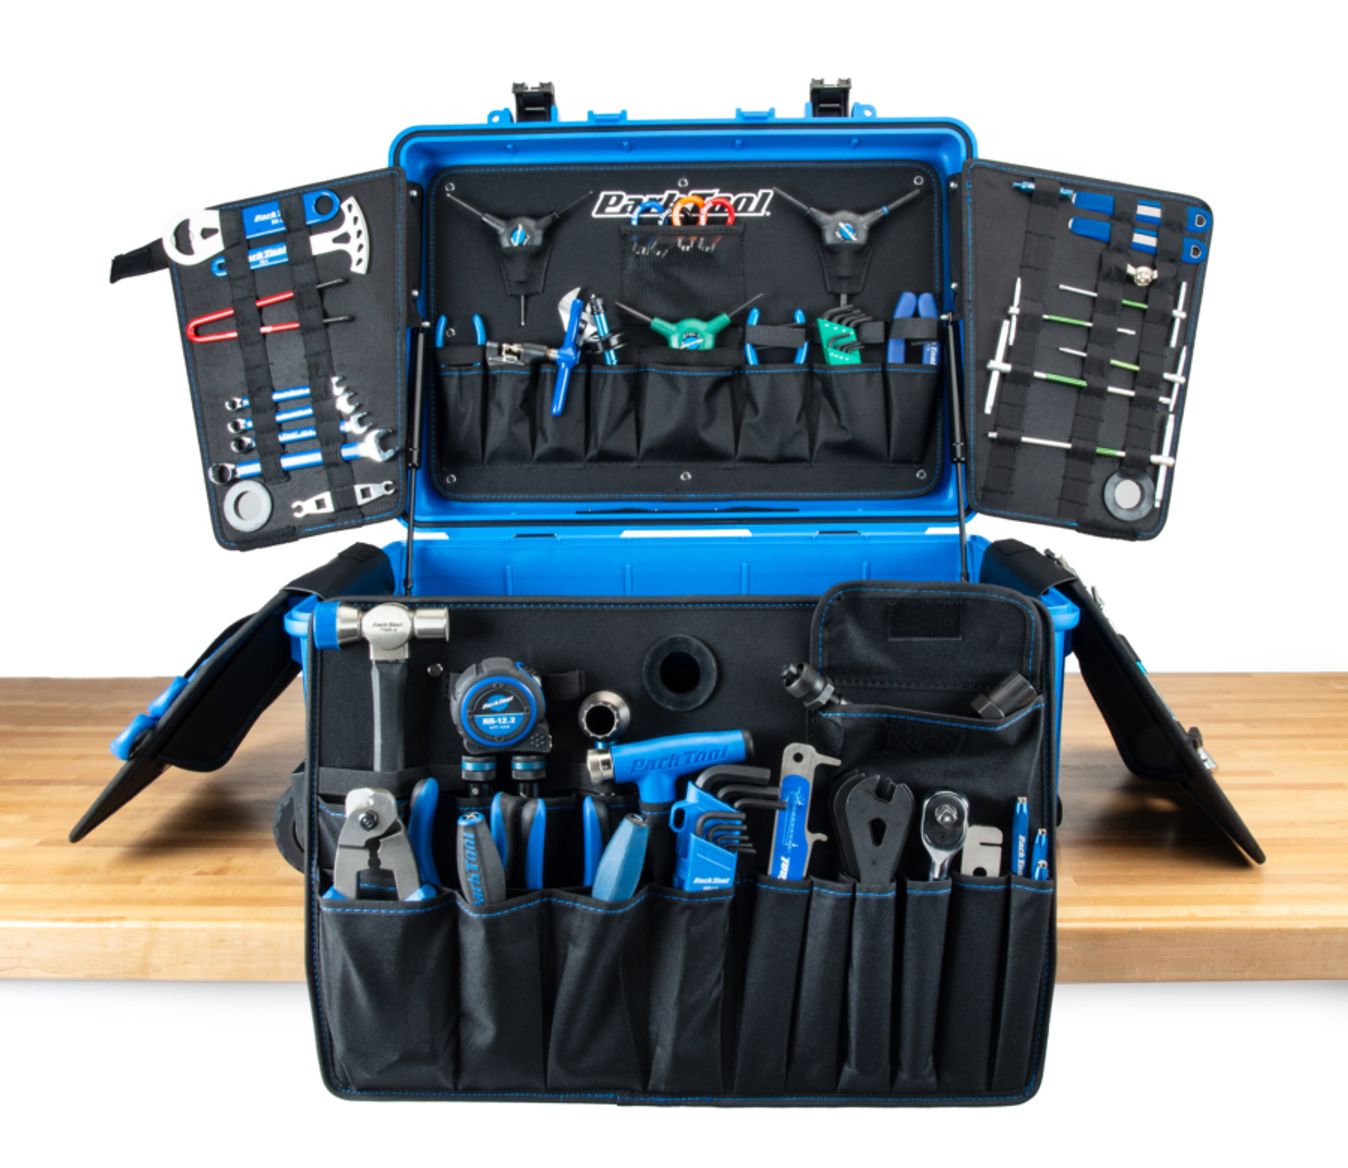 The kit contains 100 tools